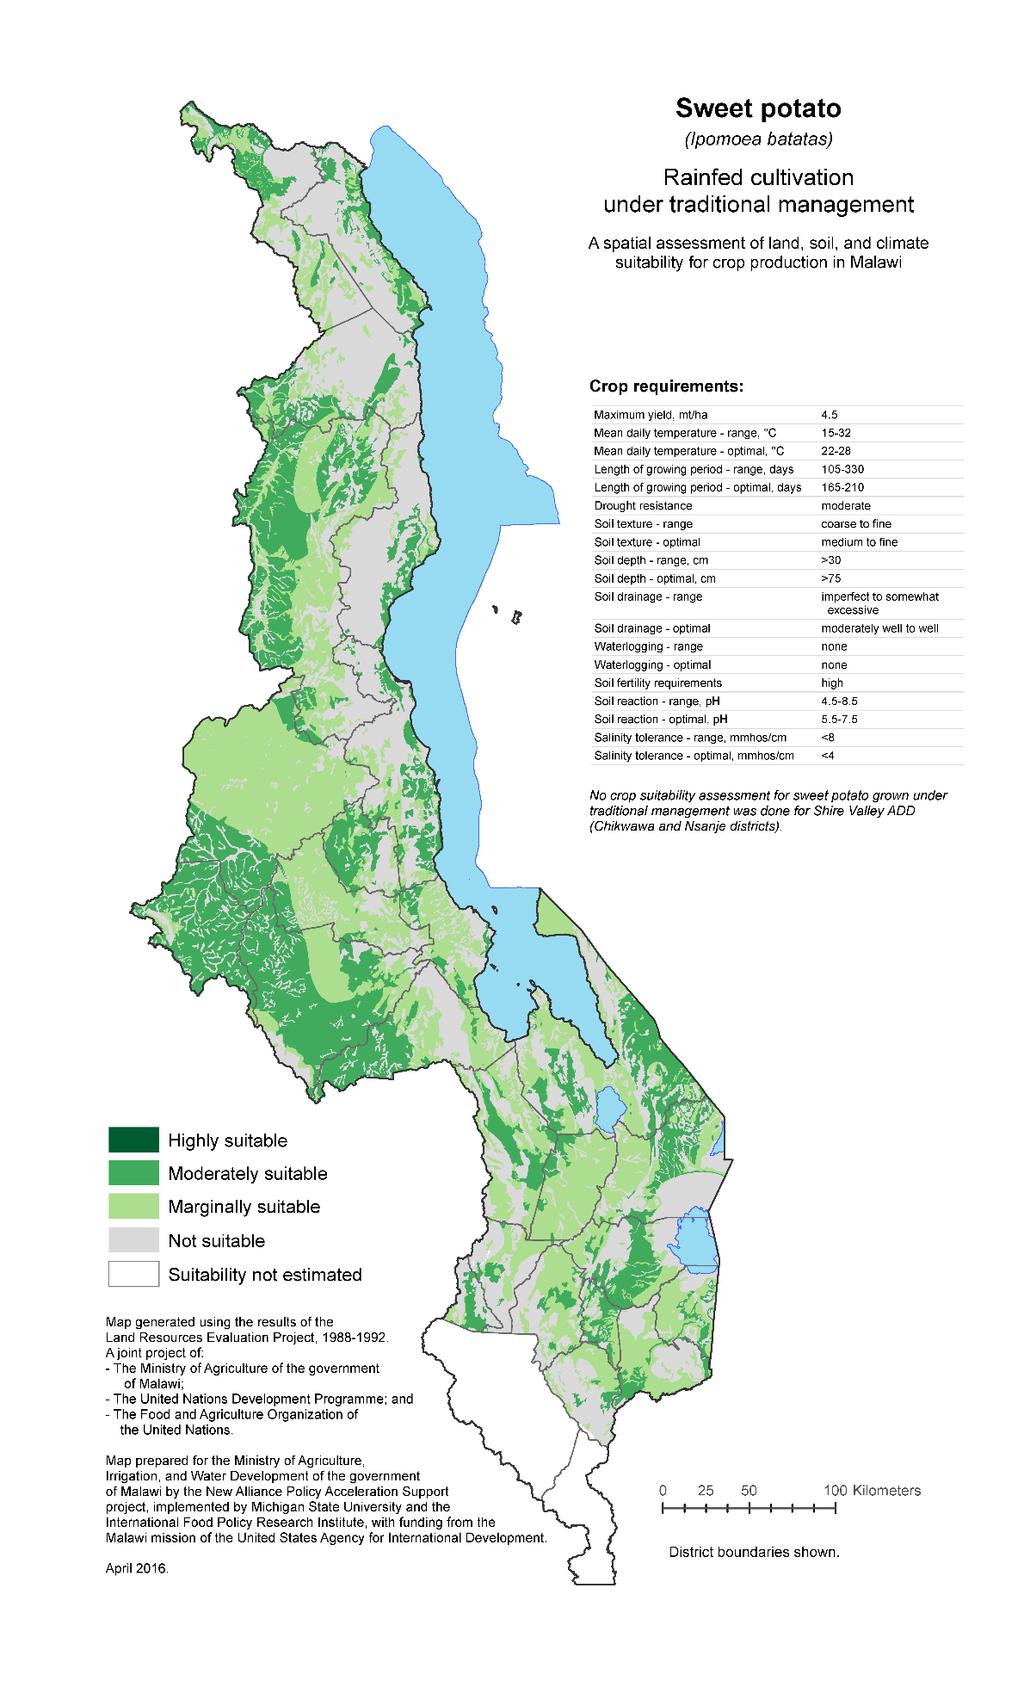 Traditional Management in Malawi Sources: MoAIWD APES data, Department of